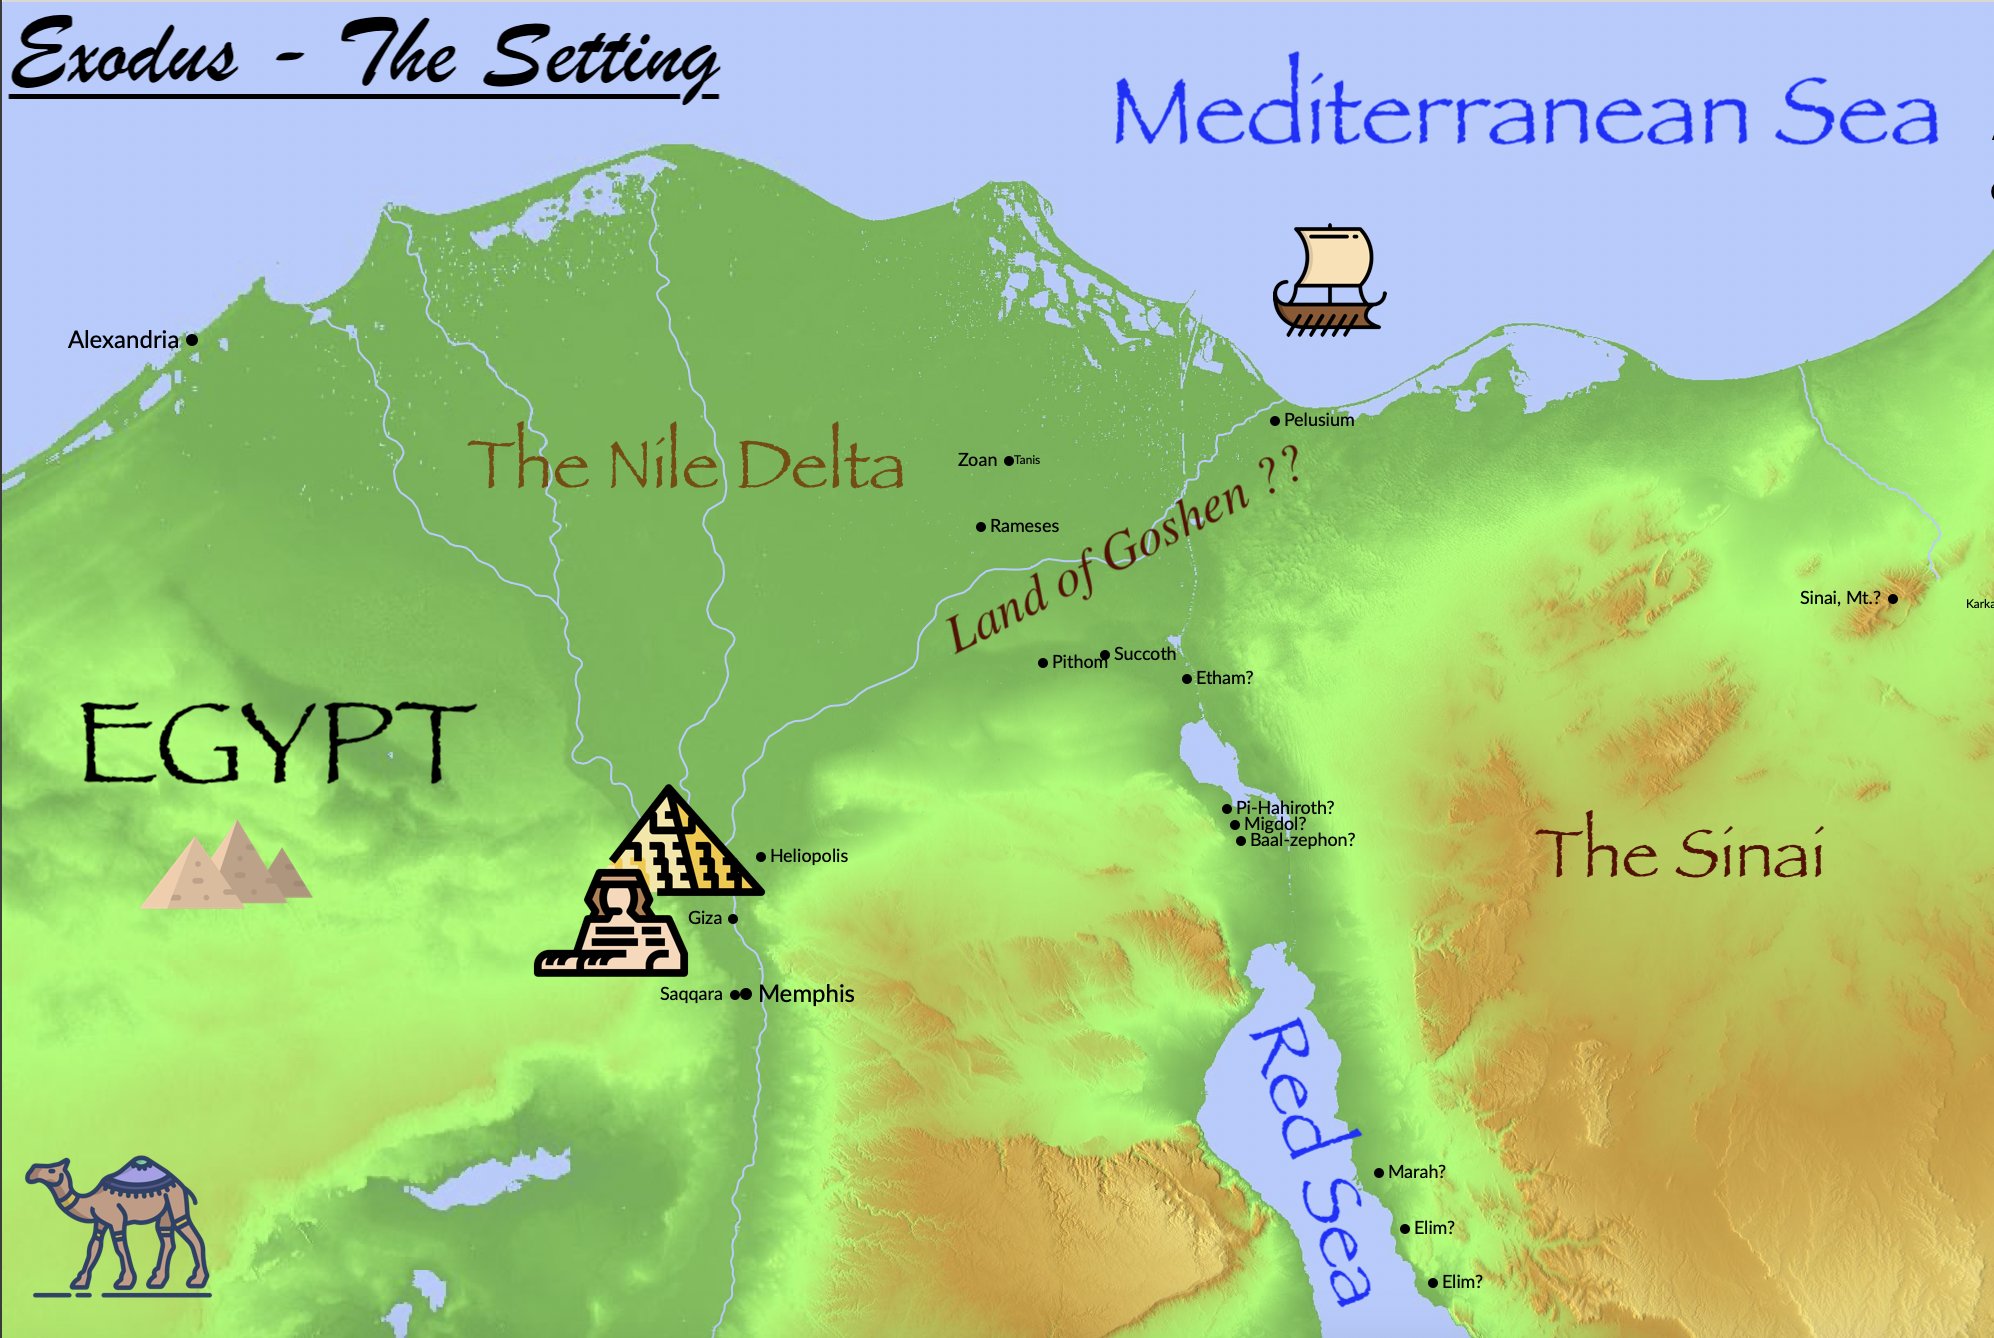 A map of the setting of the Exodus out of Egypt.